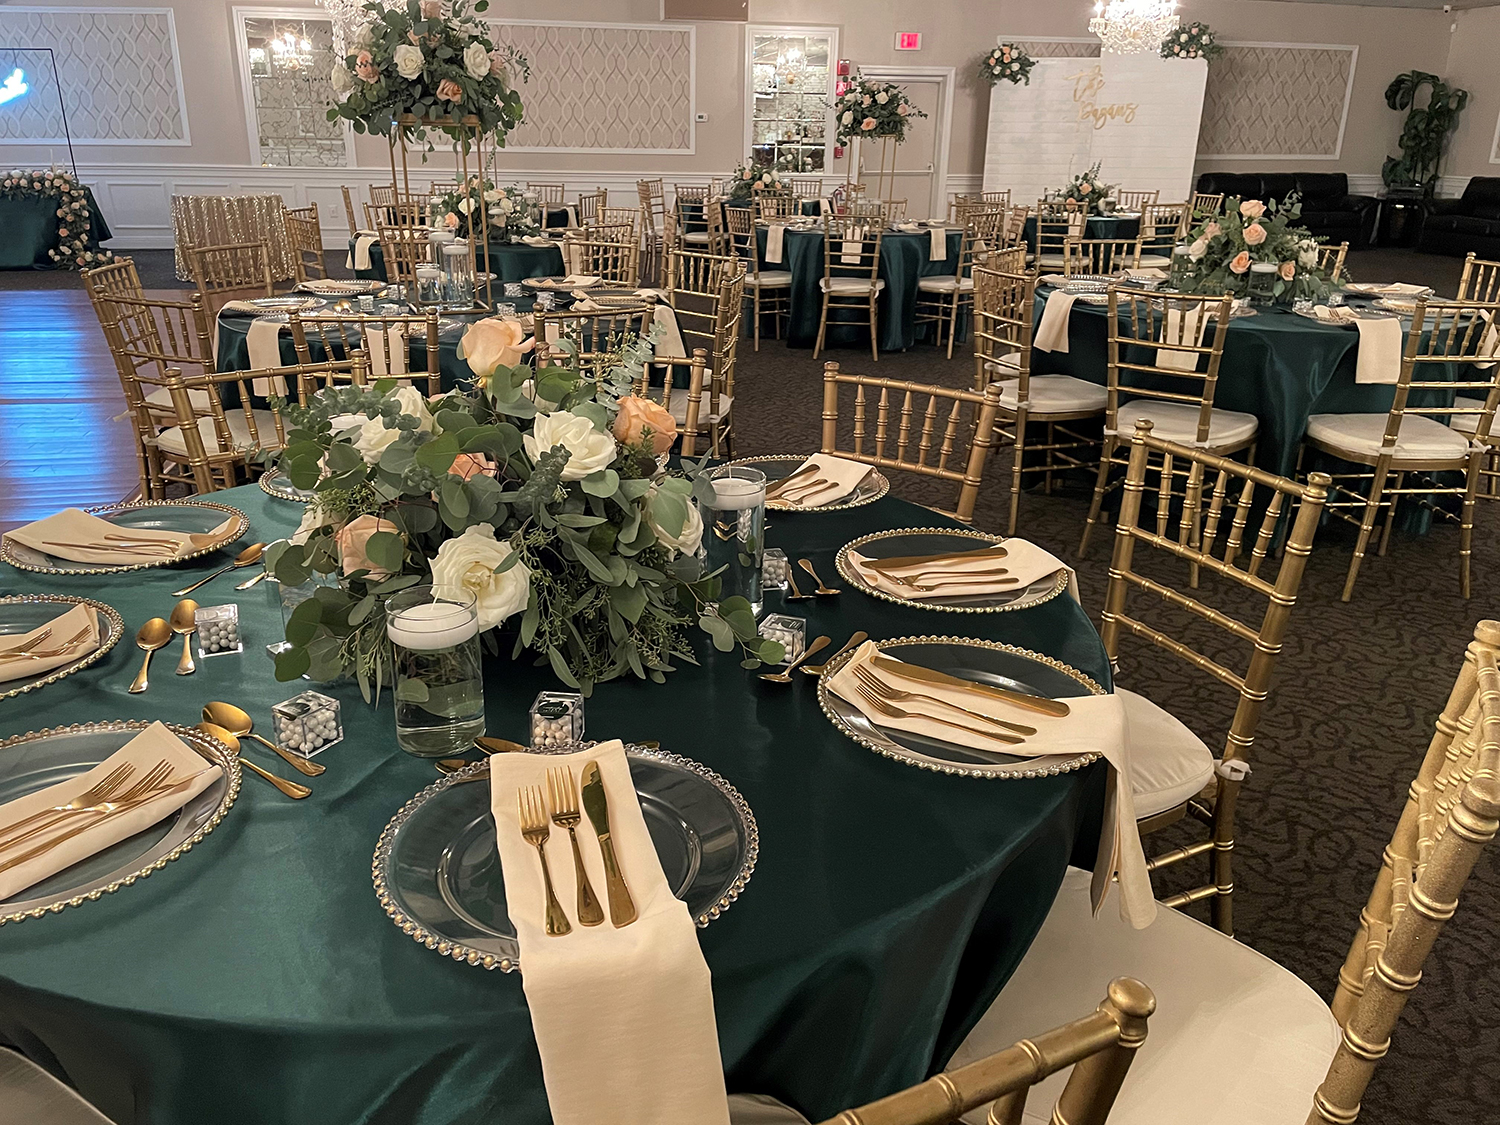 Michael's Function Halls | Function Facility | Events | Weddings |  Haverhill, MA